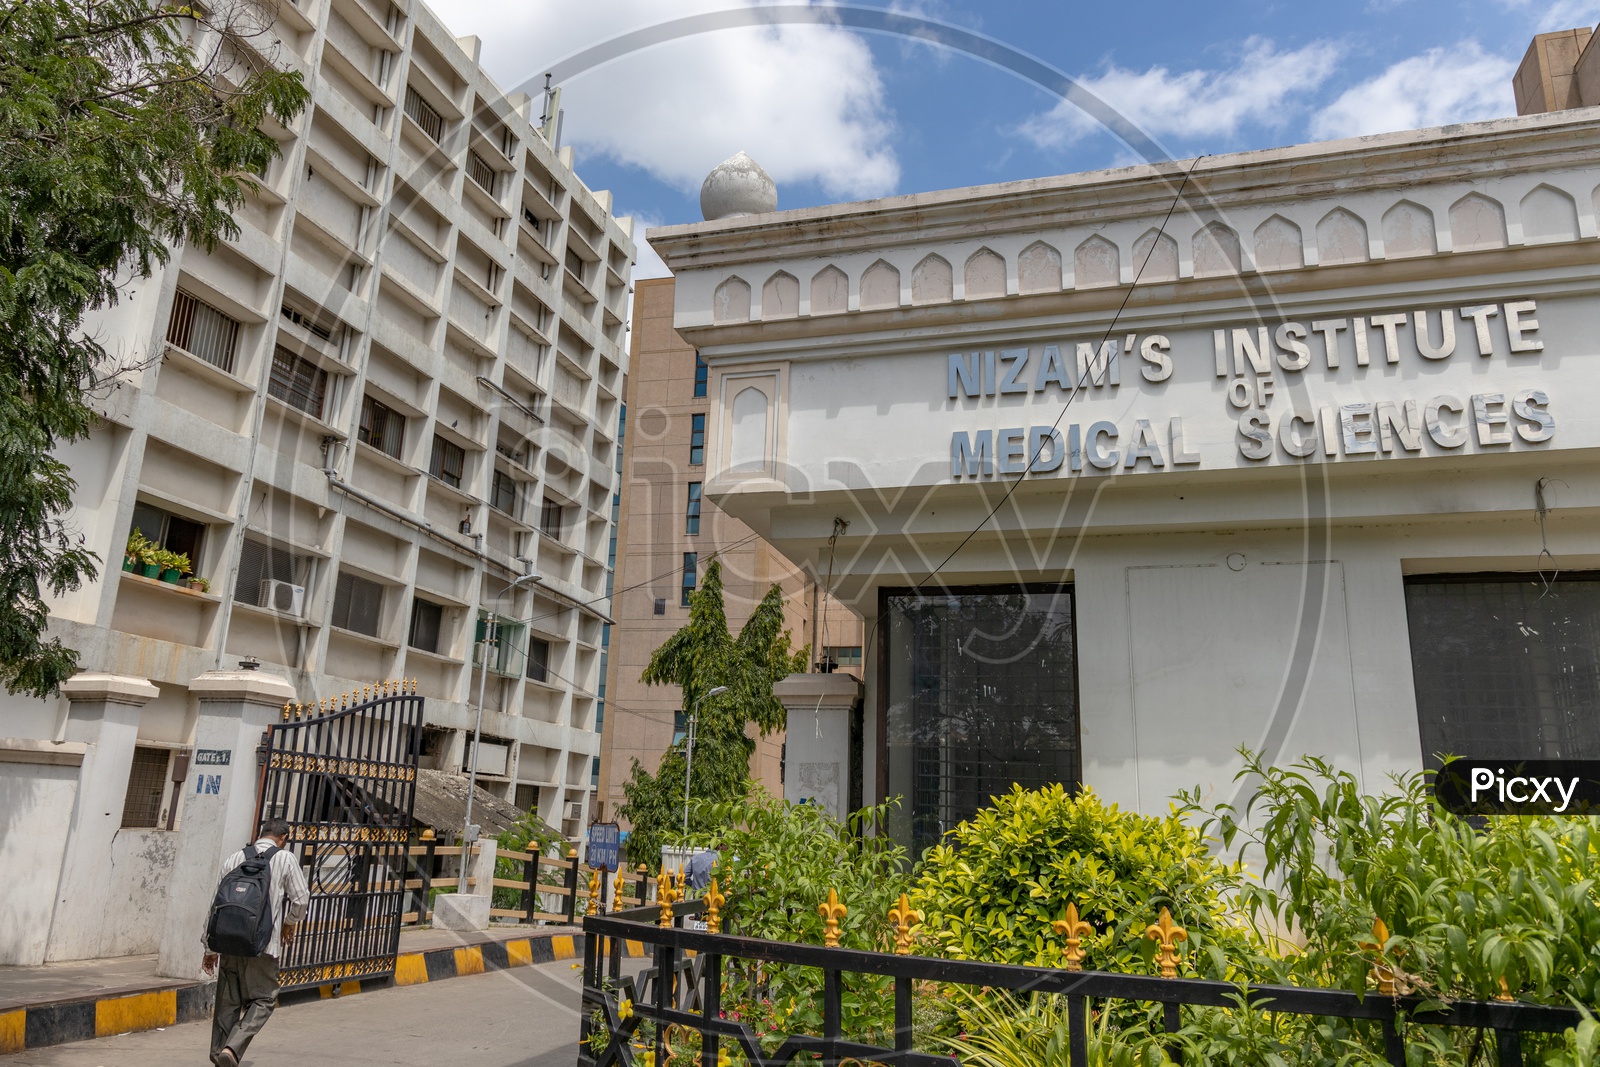 Nizam's Institute Of Medical Sciences  Name On Entrance Arch